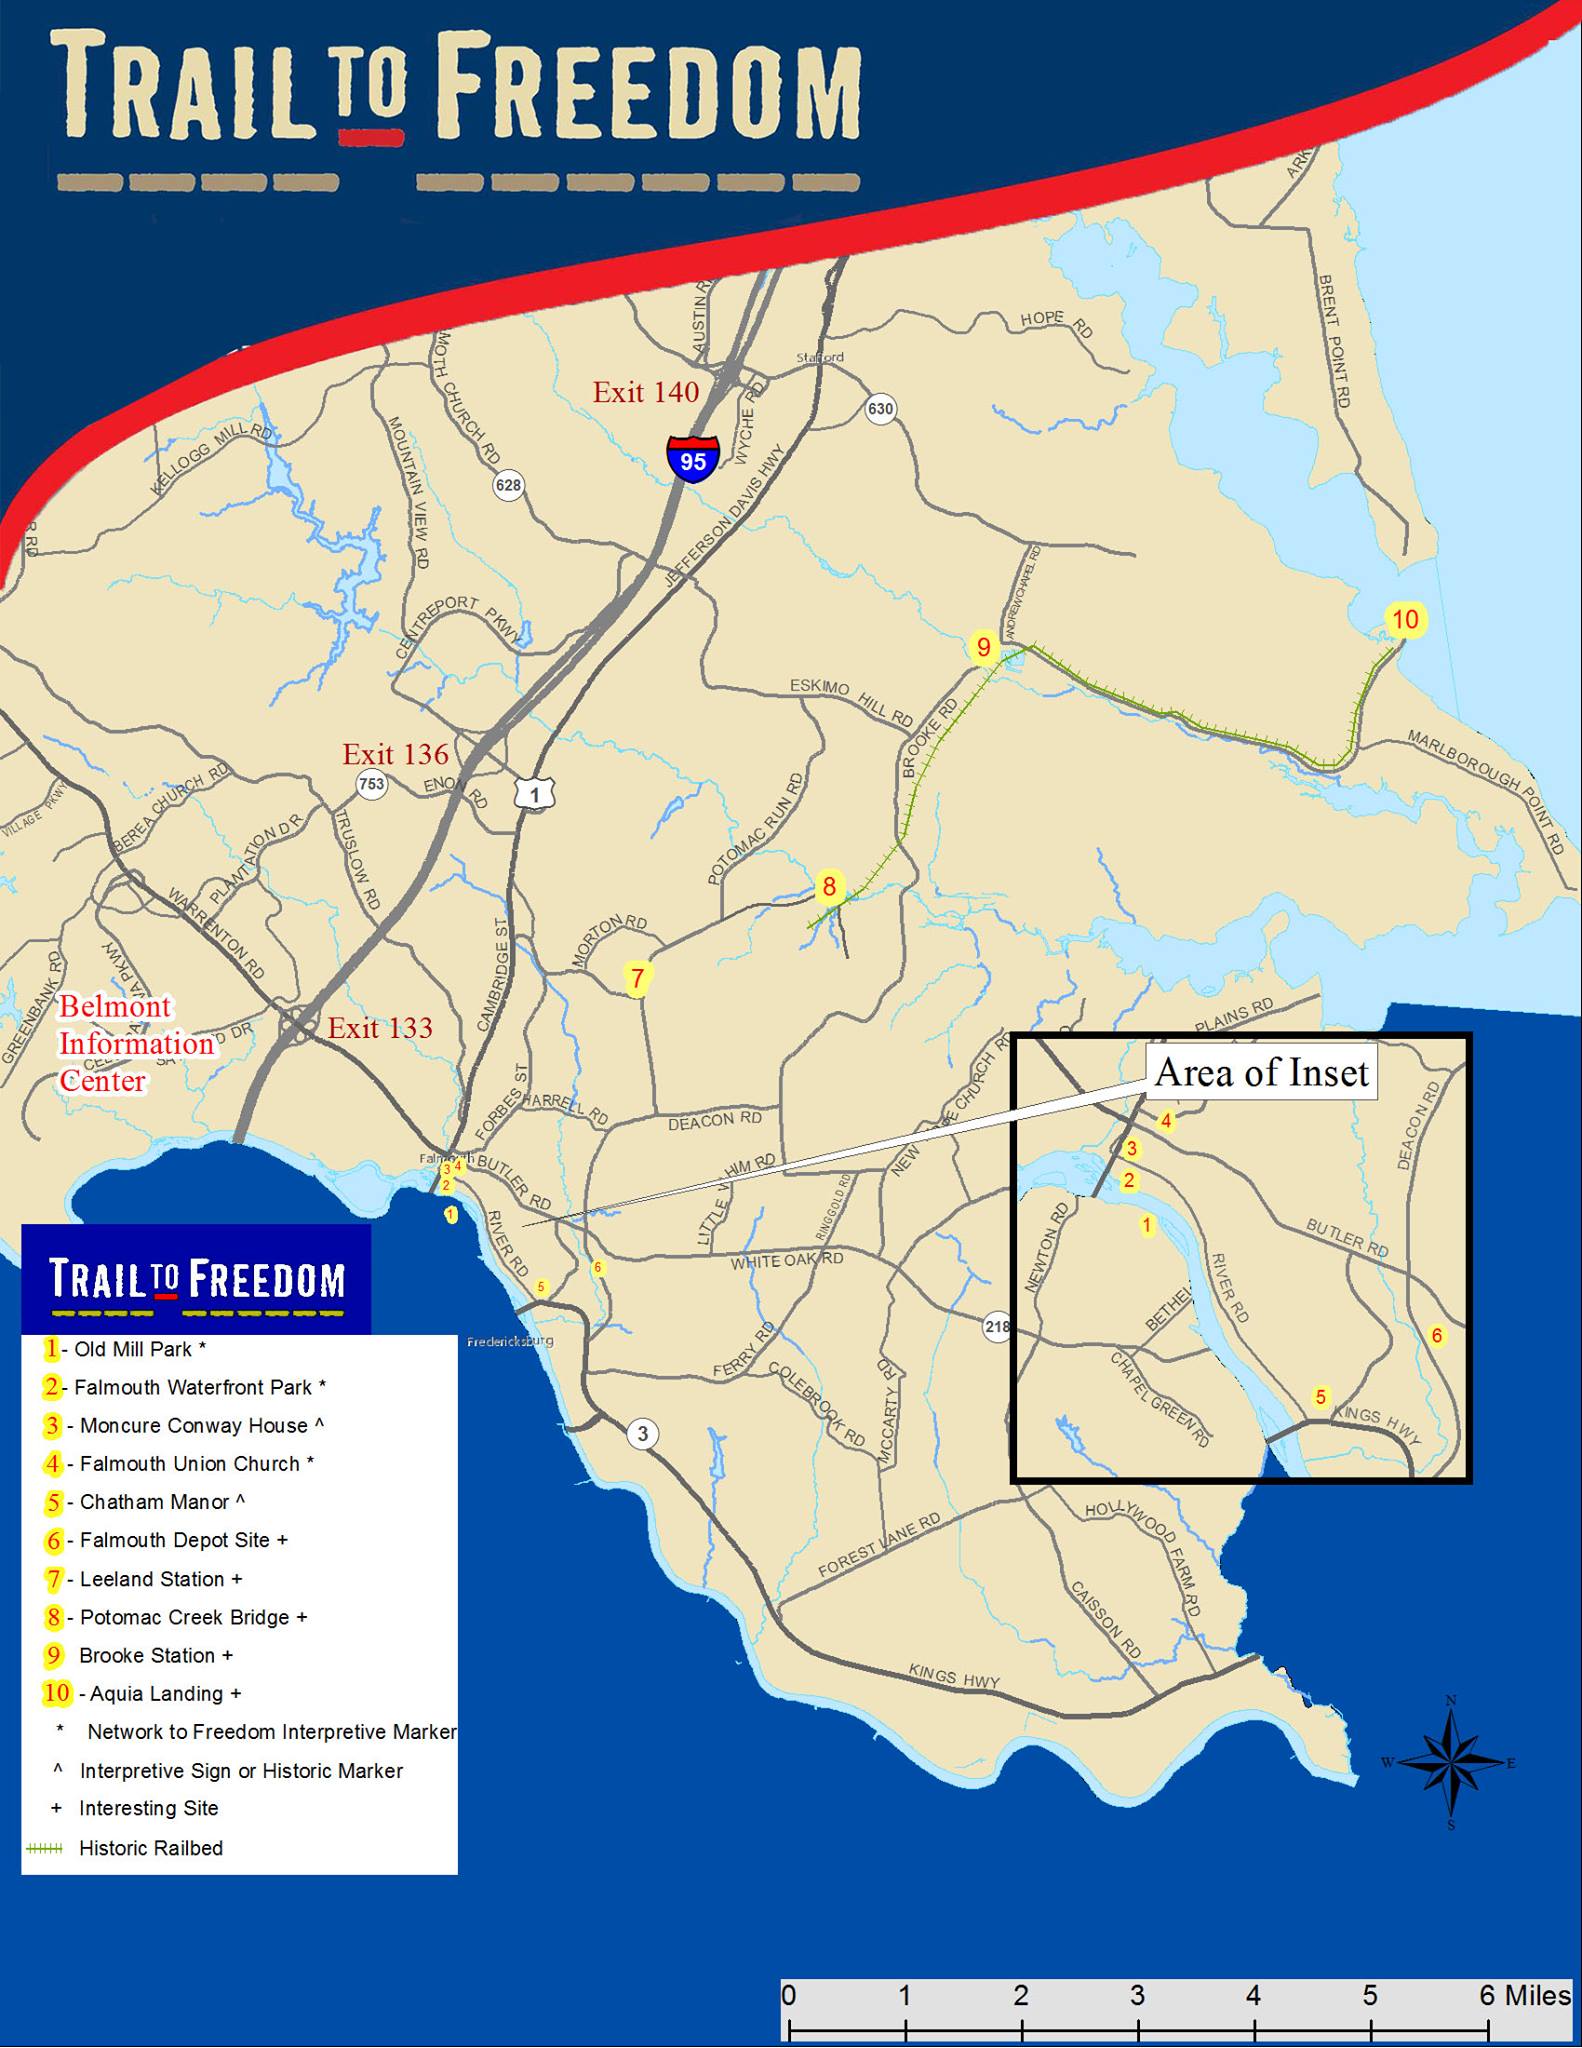 Trail to freedom map